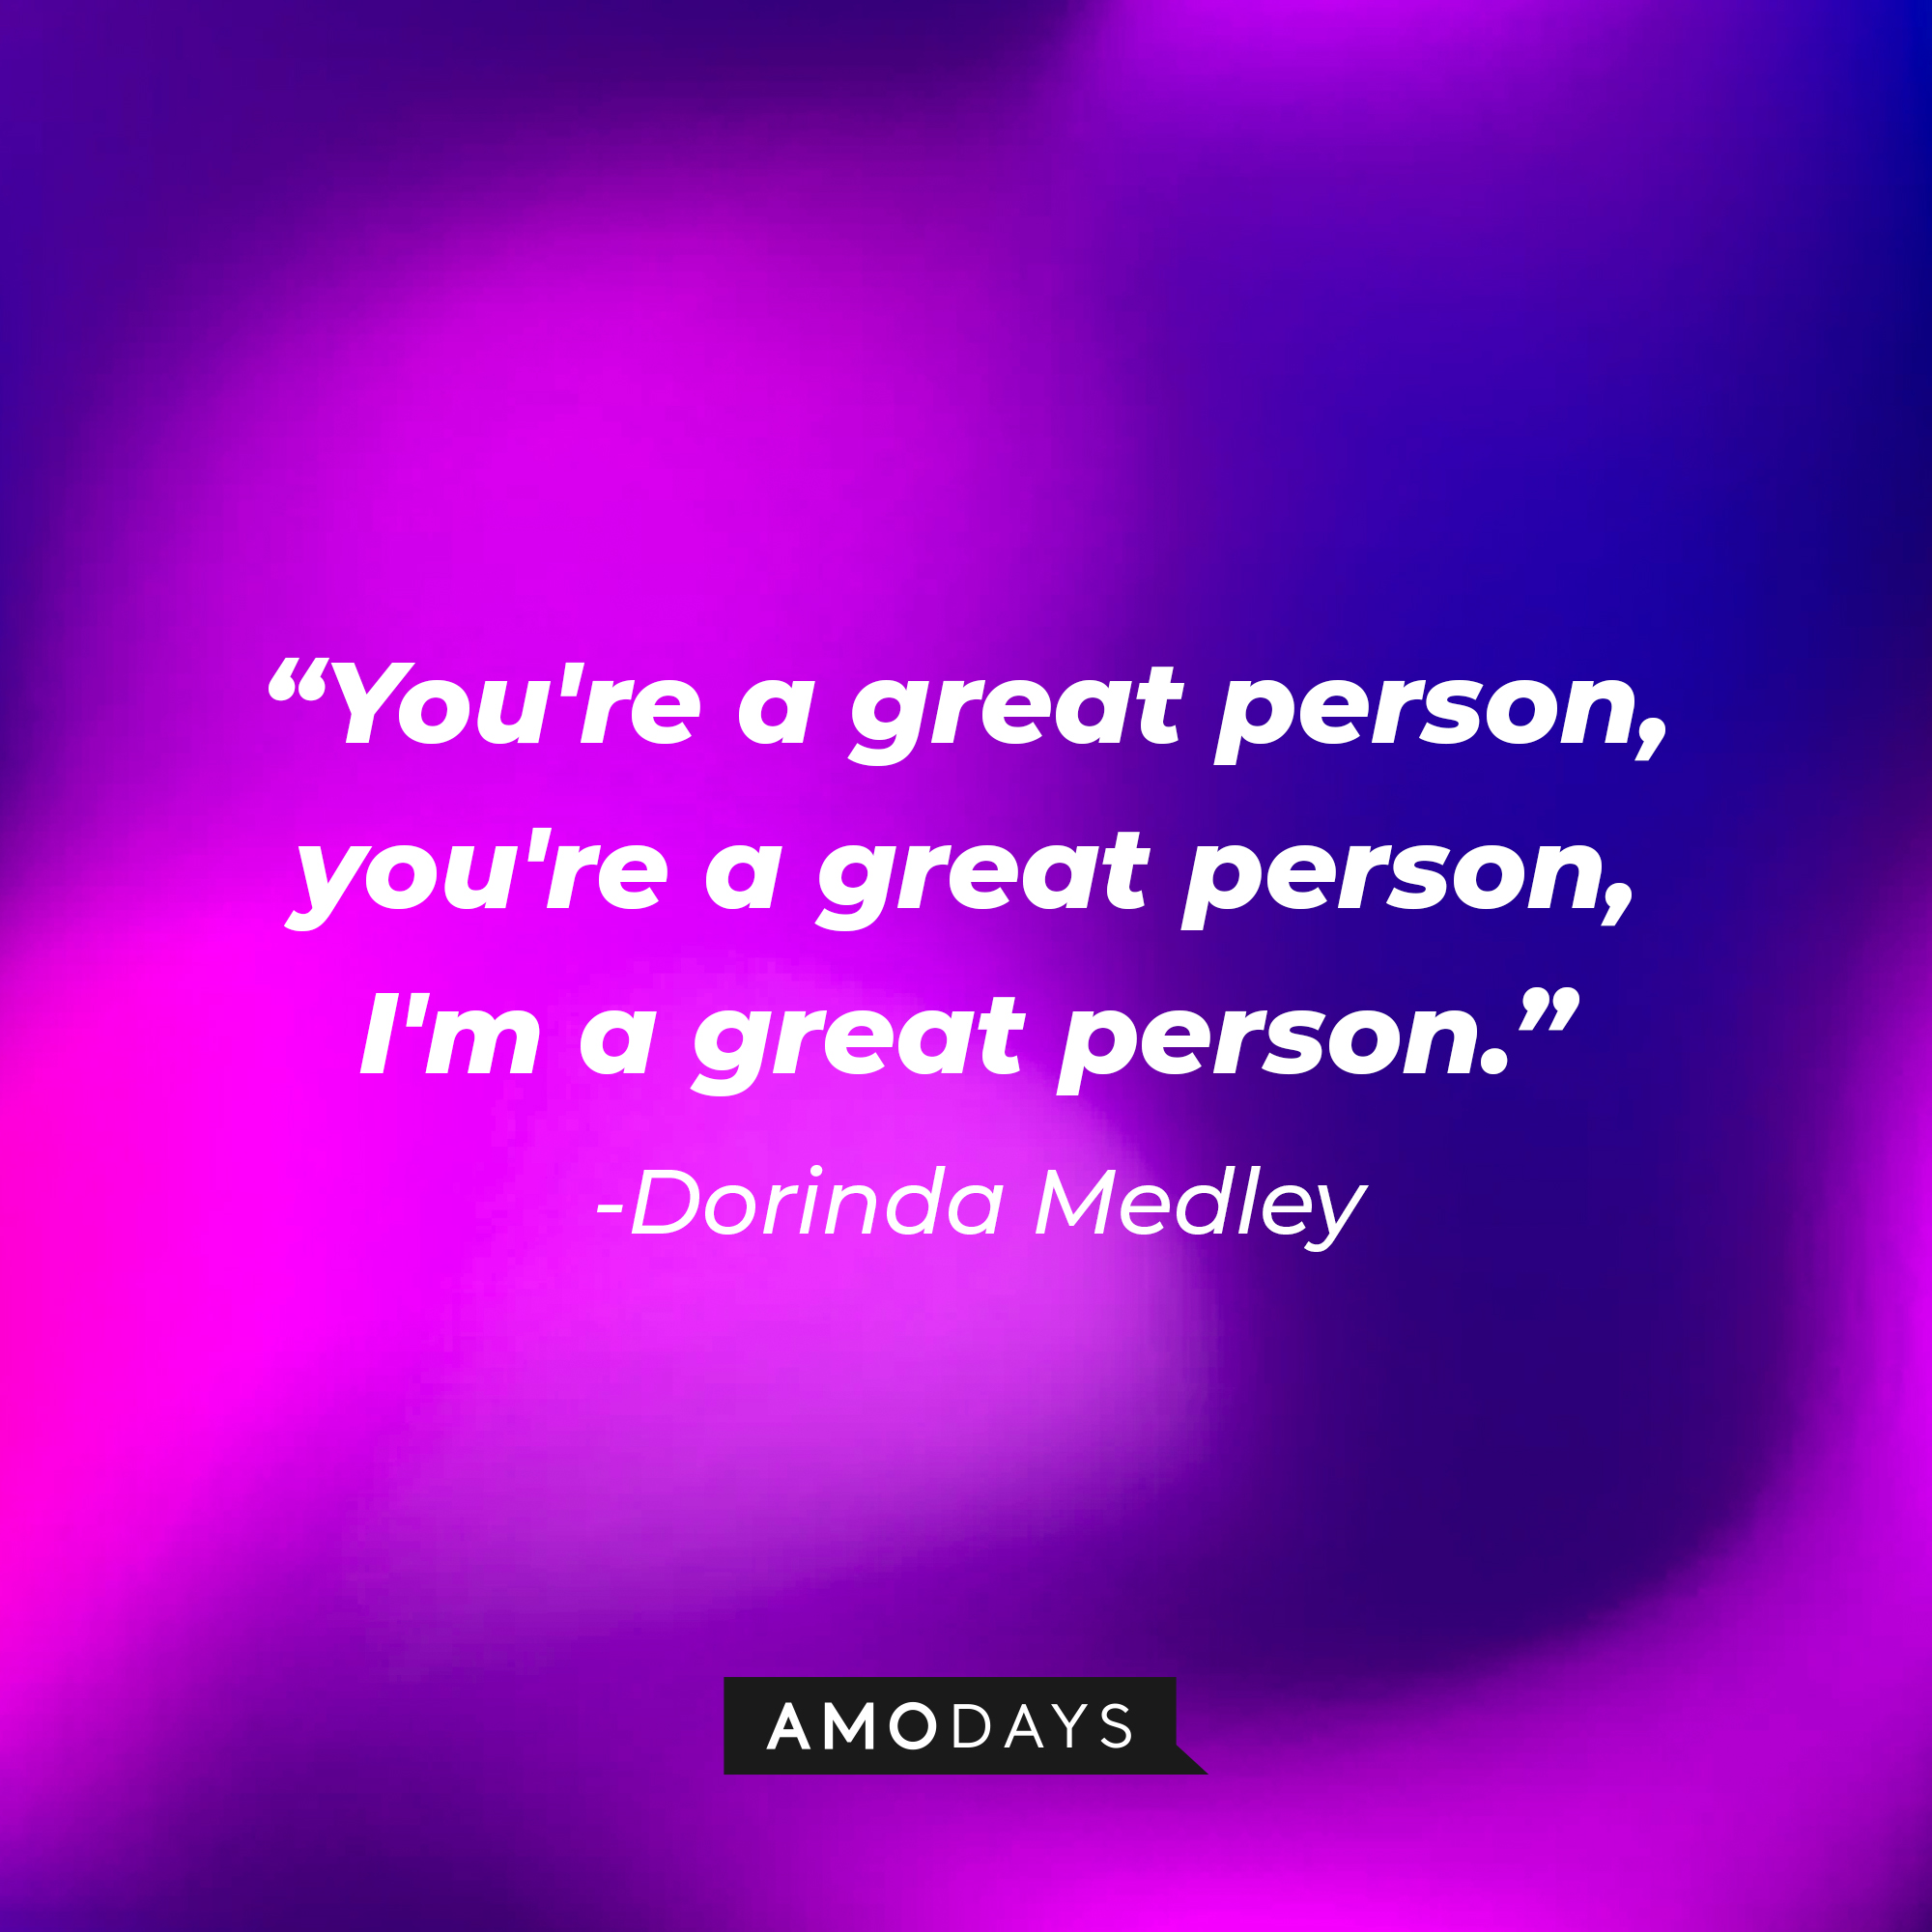 Dorinda Medley's quote: "You're a great person, you're a great person, I'm a great person." | Source: AmoDays